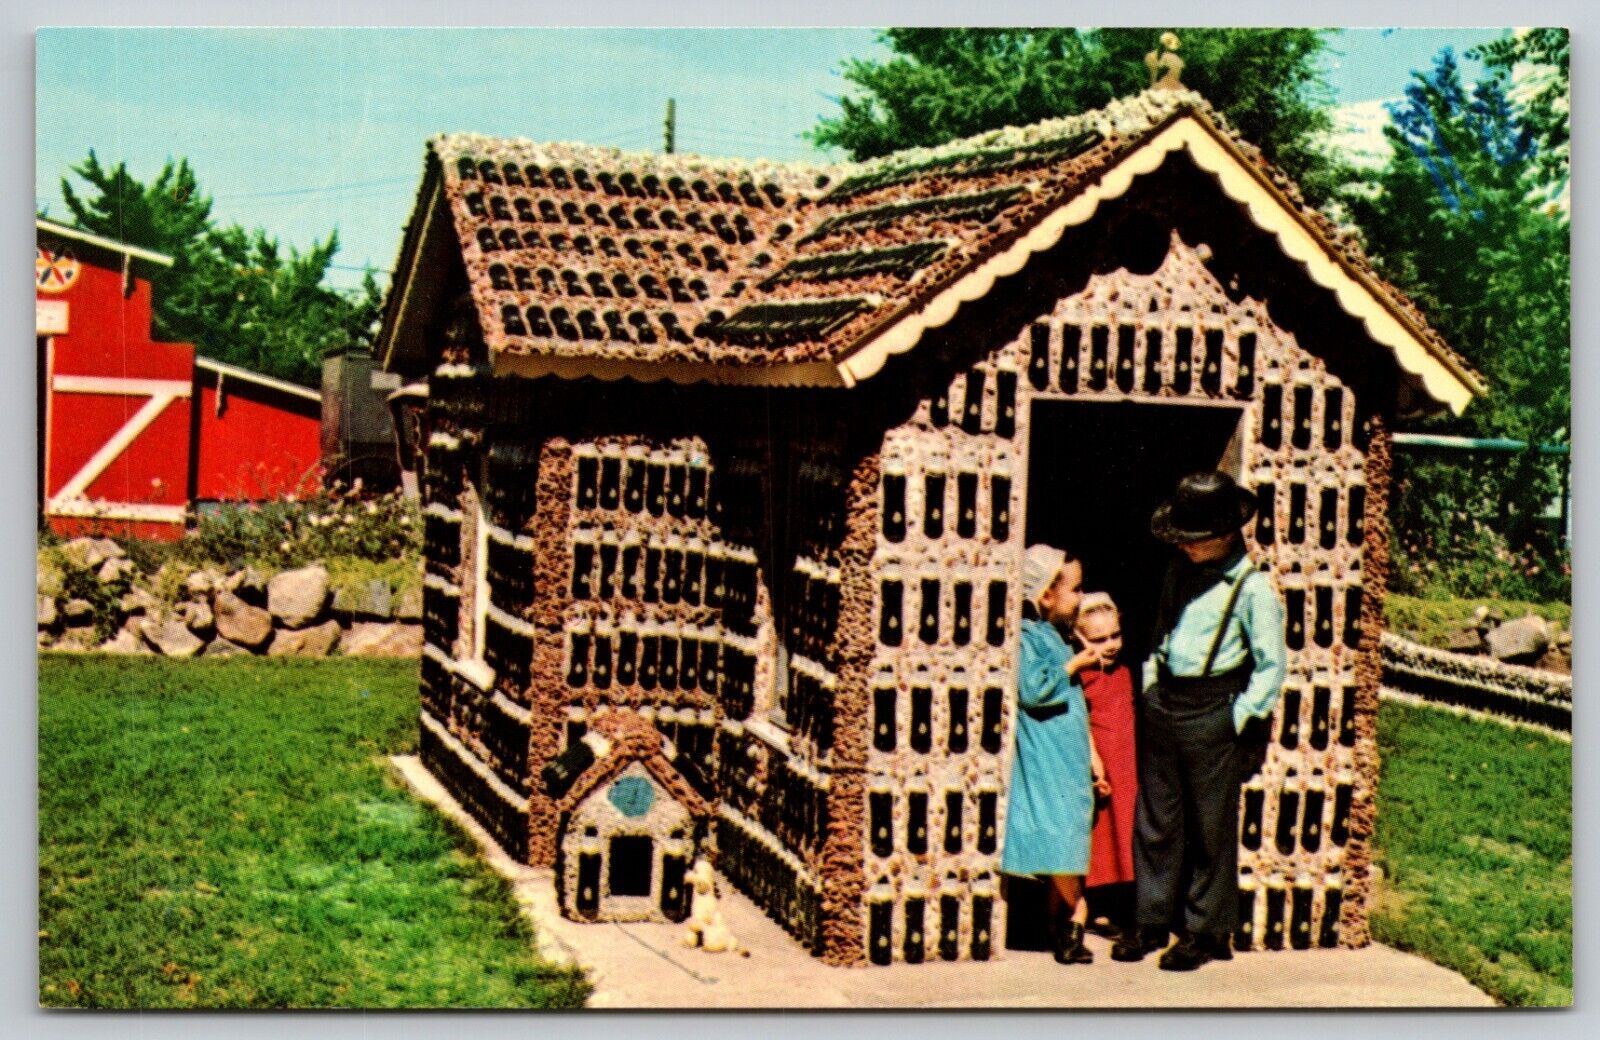 Greetings from Rockome Gardens Arcola IL House Built from Bottles 1969 Postcard